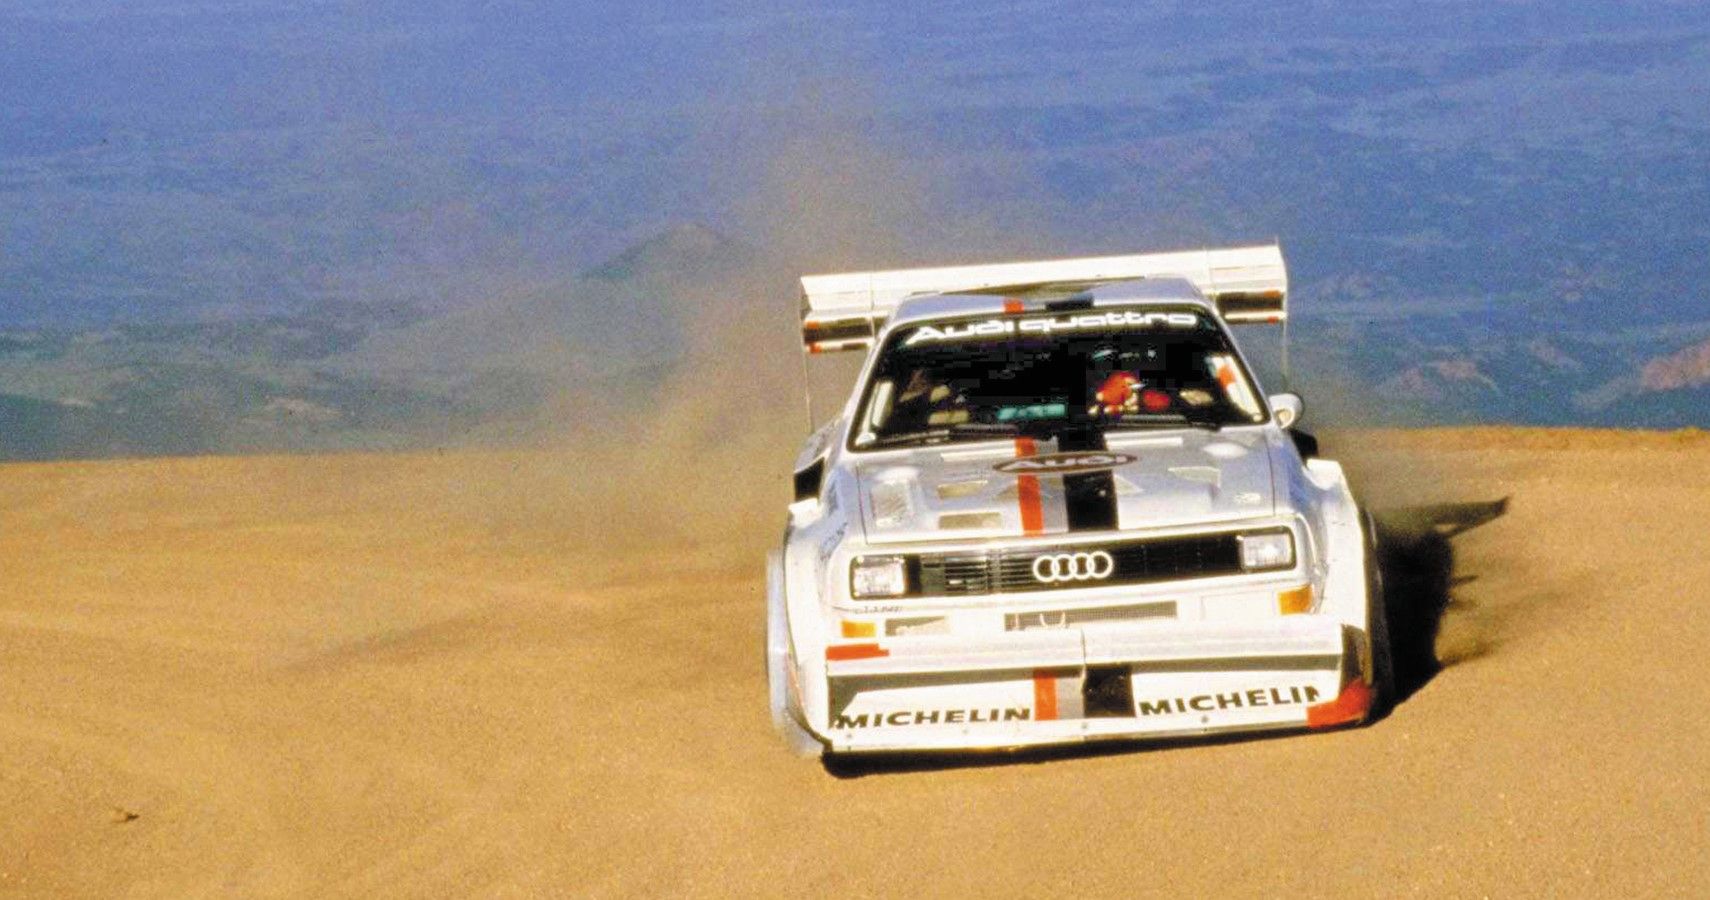 Audi Sport Quattro drifting in sand front view